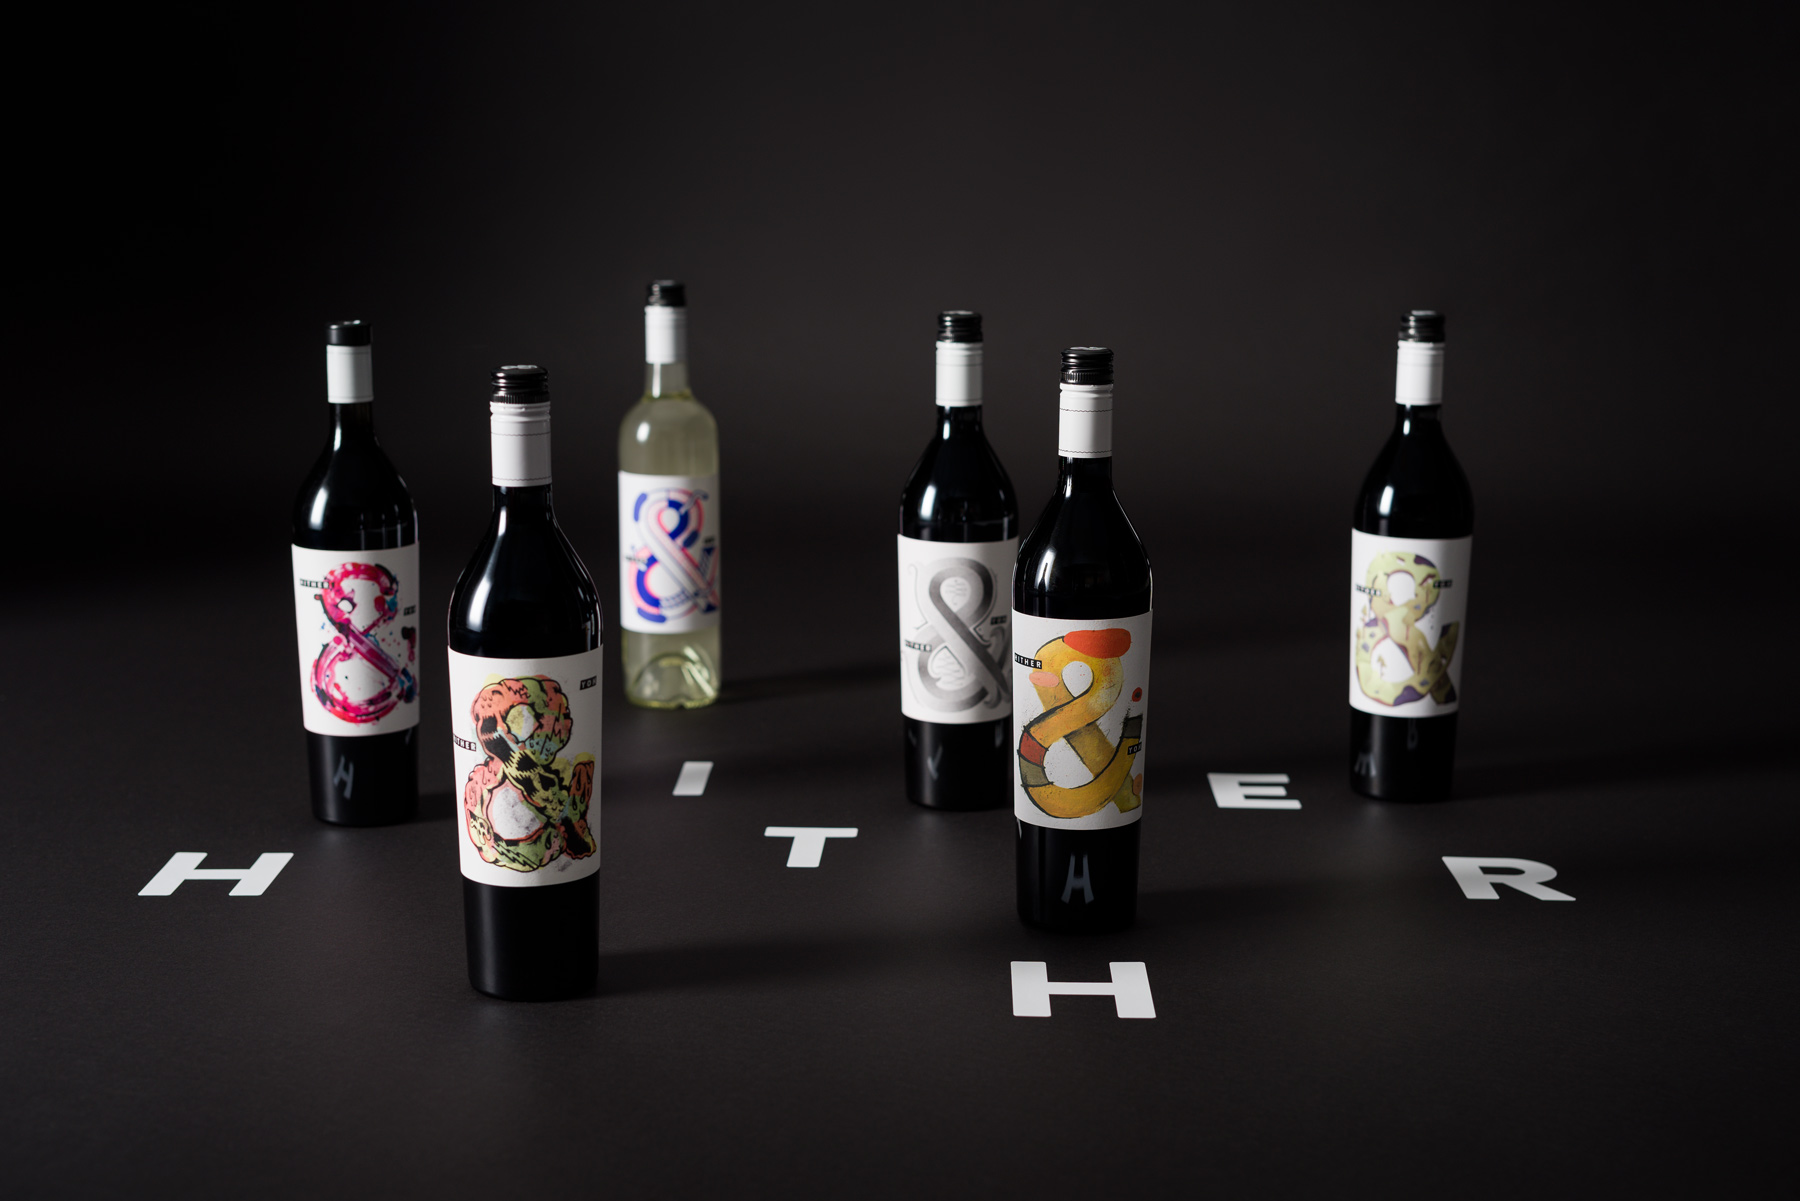 Dynamic type and Minimal Layout is Central to this Wines Ranges Distinct Identity